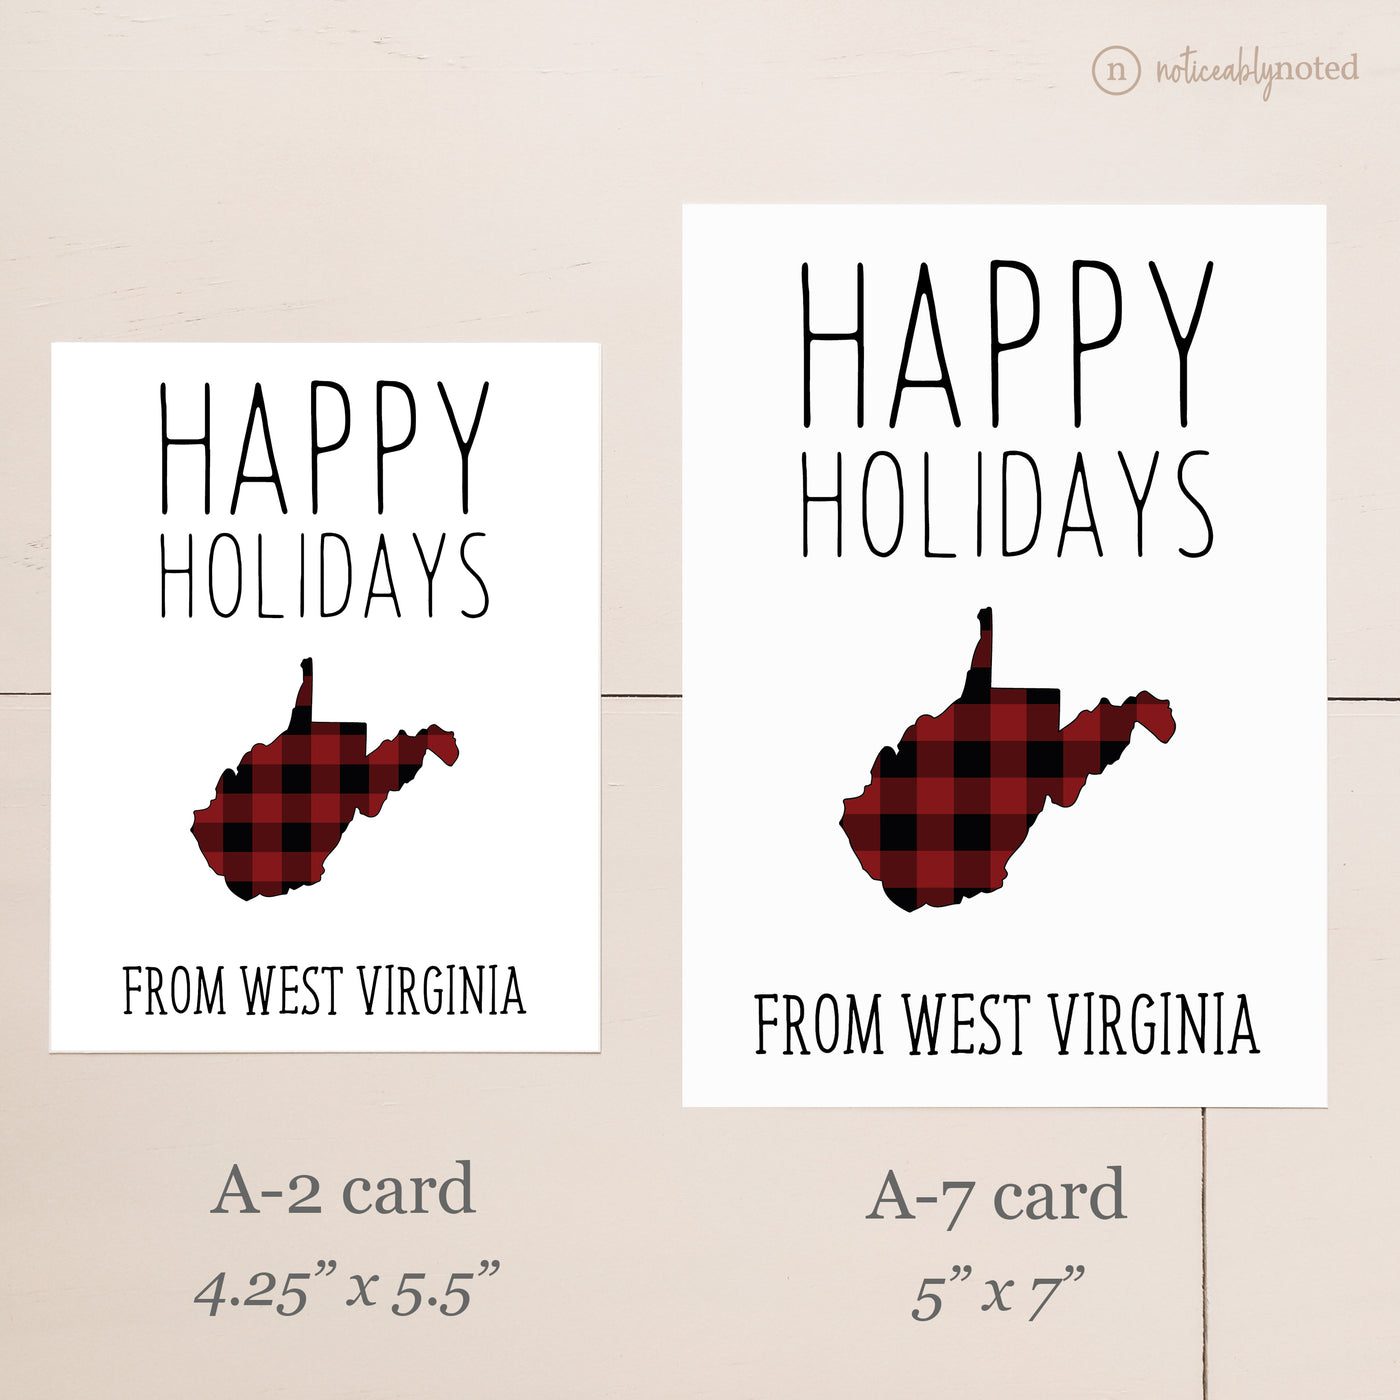 West Virginia Holiday Card - Card Size Comparison | Noticeably Noted